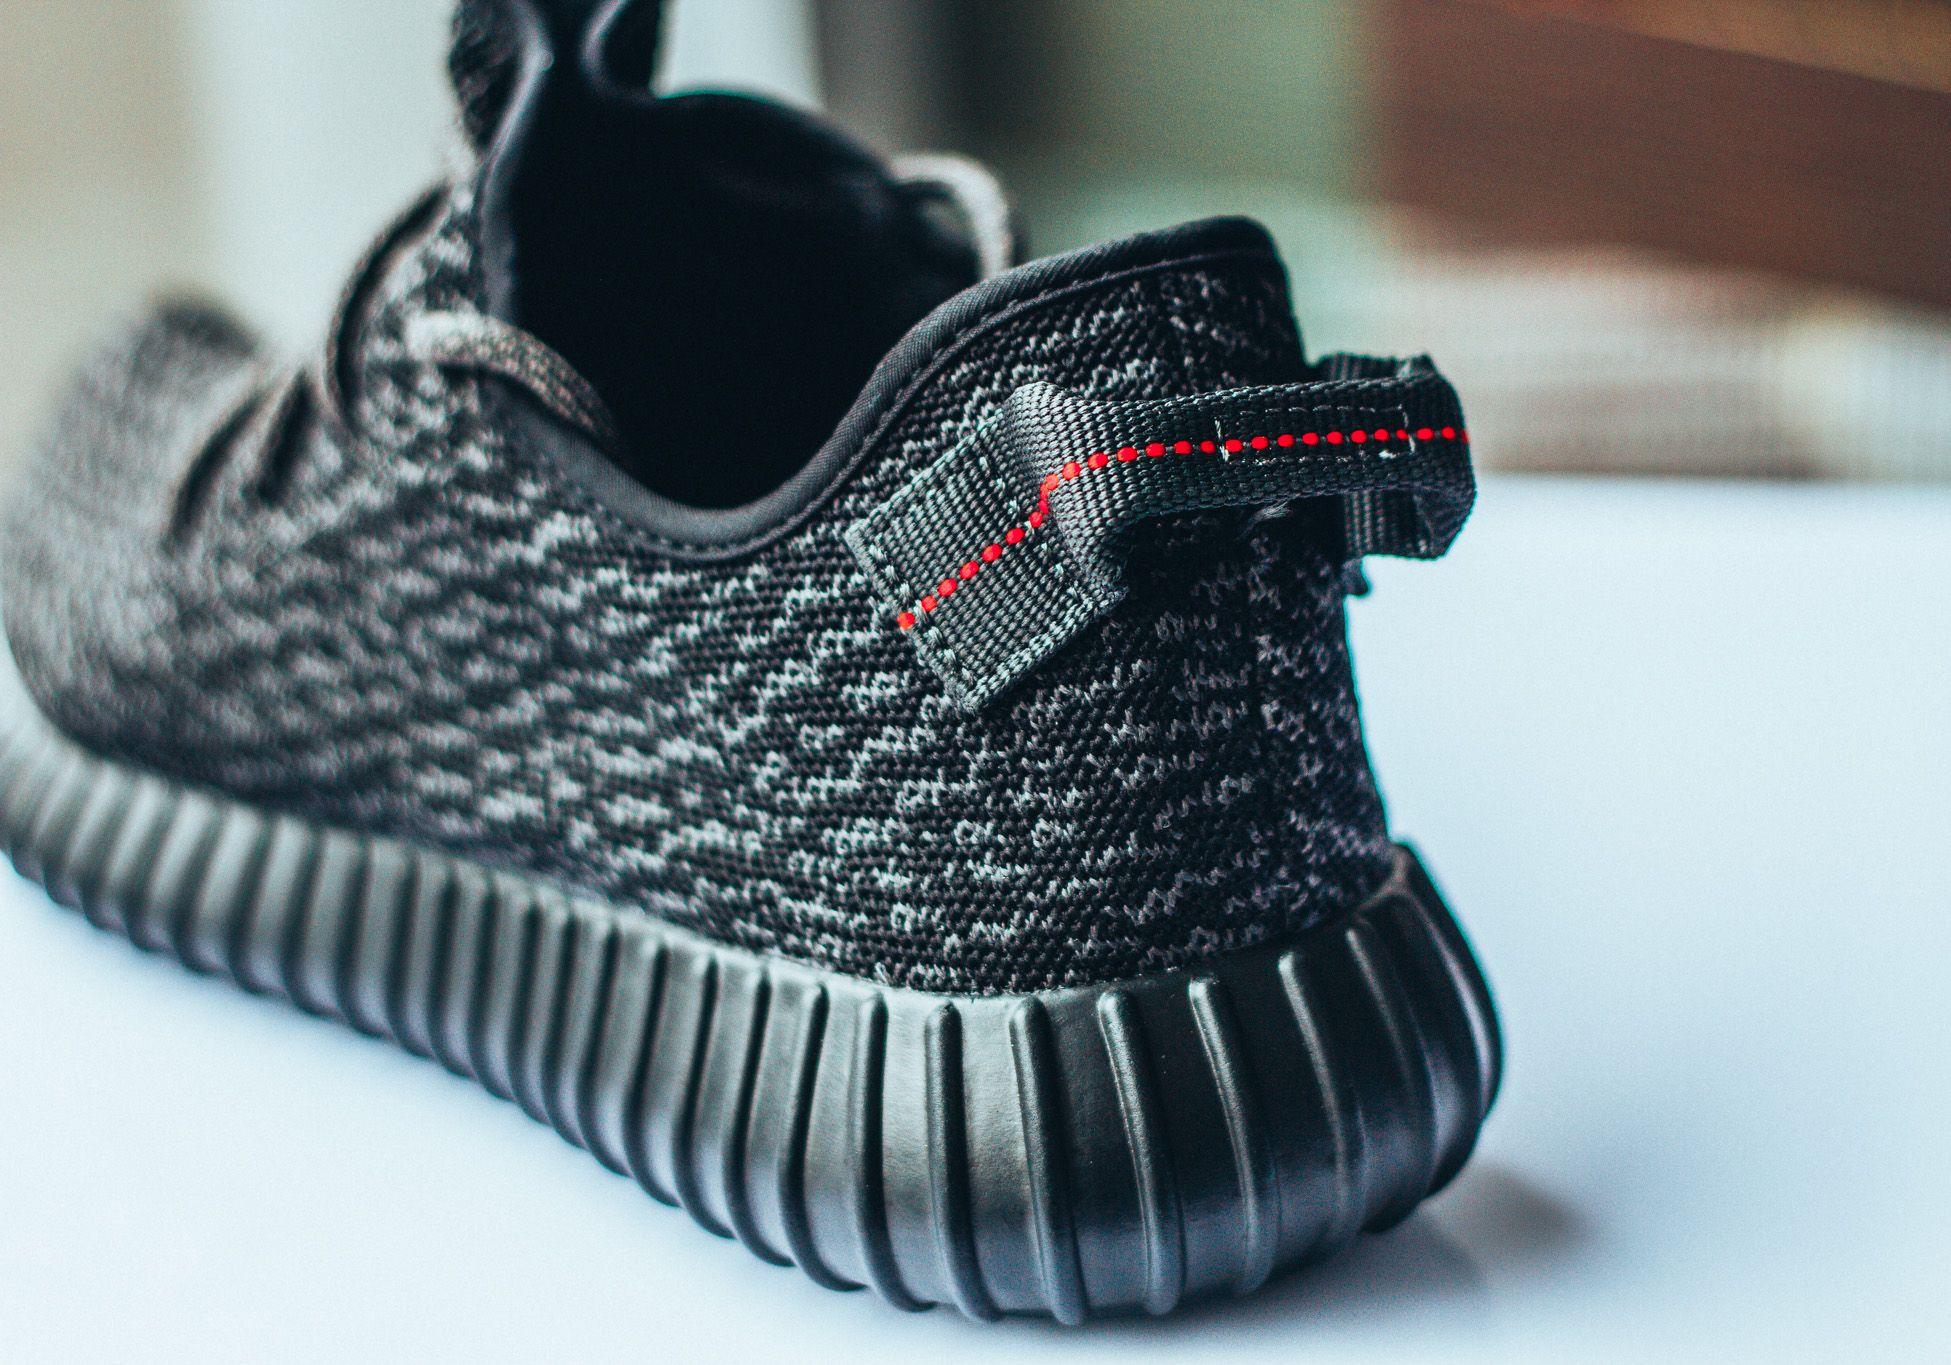 Yeezy Shoes Logo - Adidas Originals Yeezy Boost 350 'Black' - Review and Launch